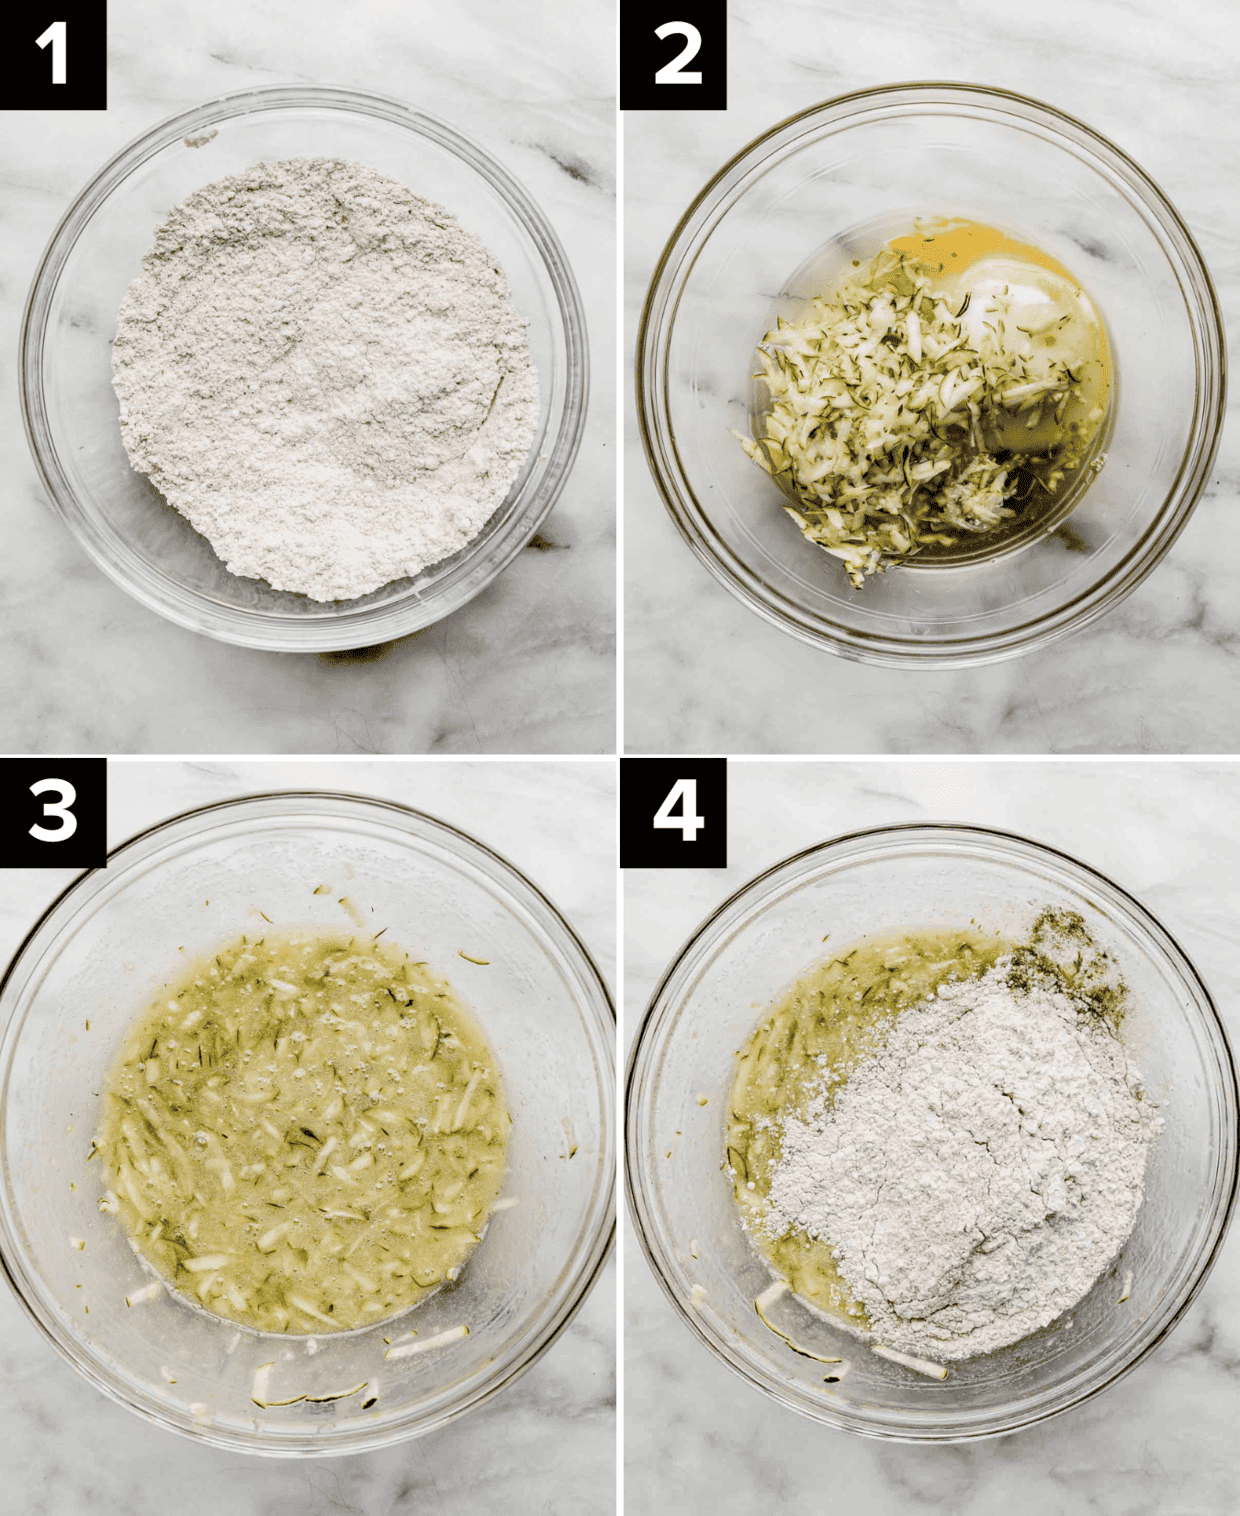 Four images, each one of a glass bowl filled with varying ingredients to make Zucchini Chocolate Chip Muffins, top left has dry ingredients, top right is shredded zucchini and wet ingredients, bottom left is wet ingredients mixed together, bottom right has flour over the wet ingredients.